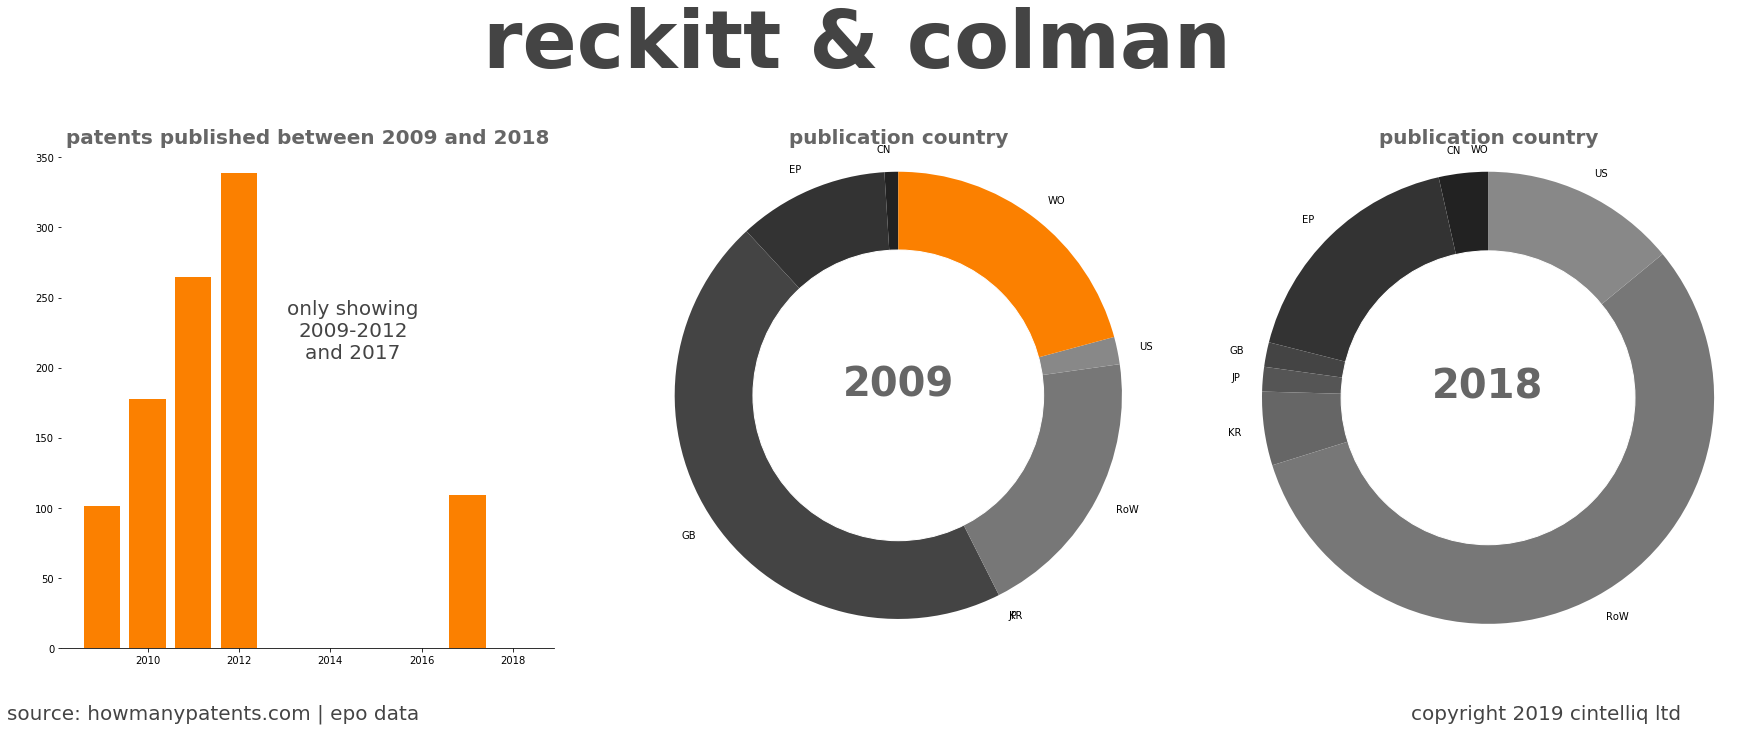 summary of patents for Reckitt & Colman 